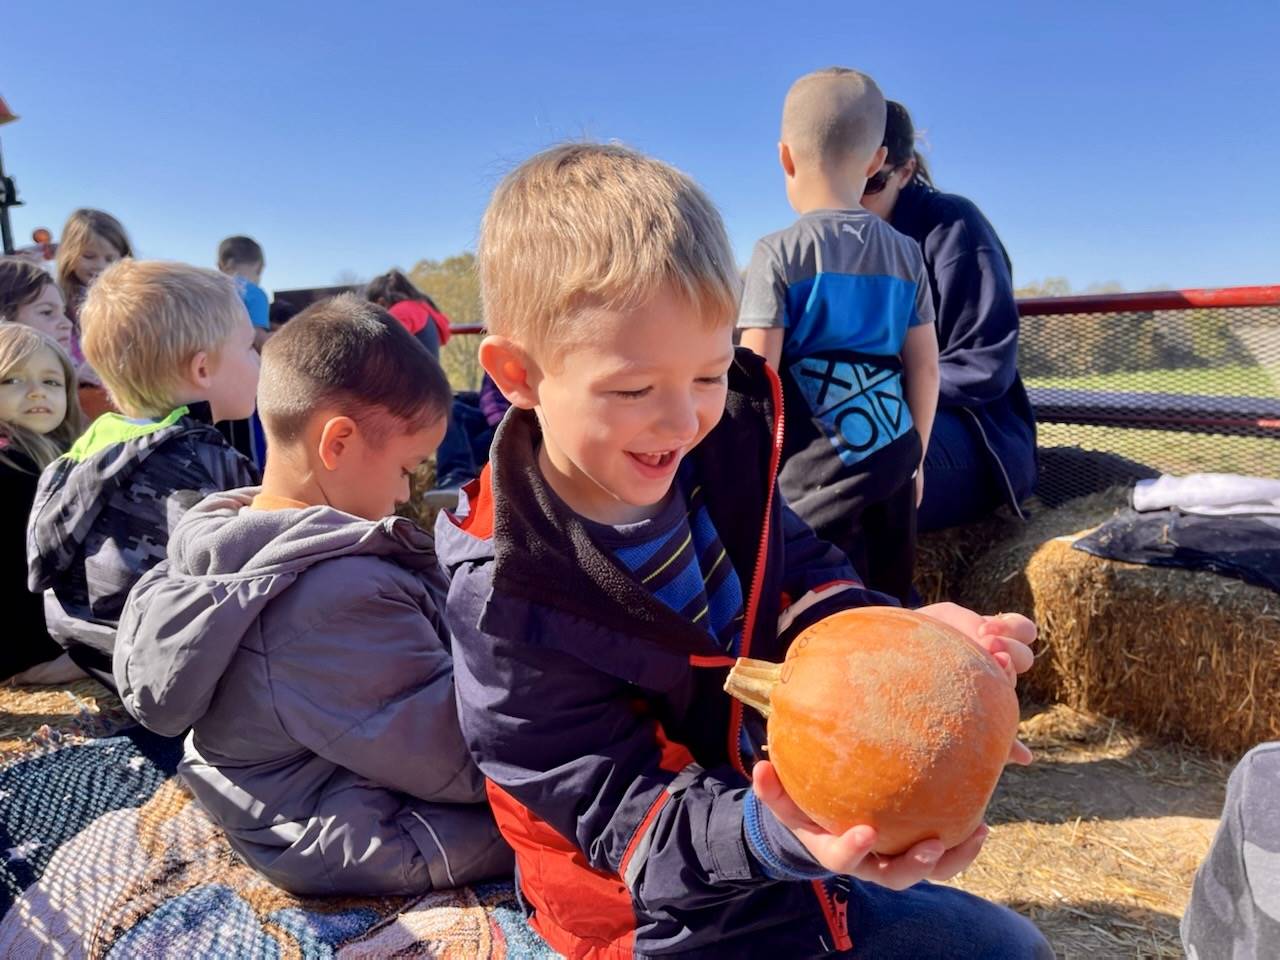 alt="student is happy with the pumpkin he picked at the pumpkin patch"